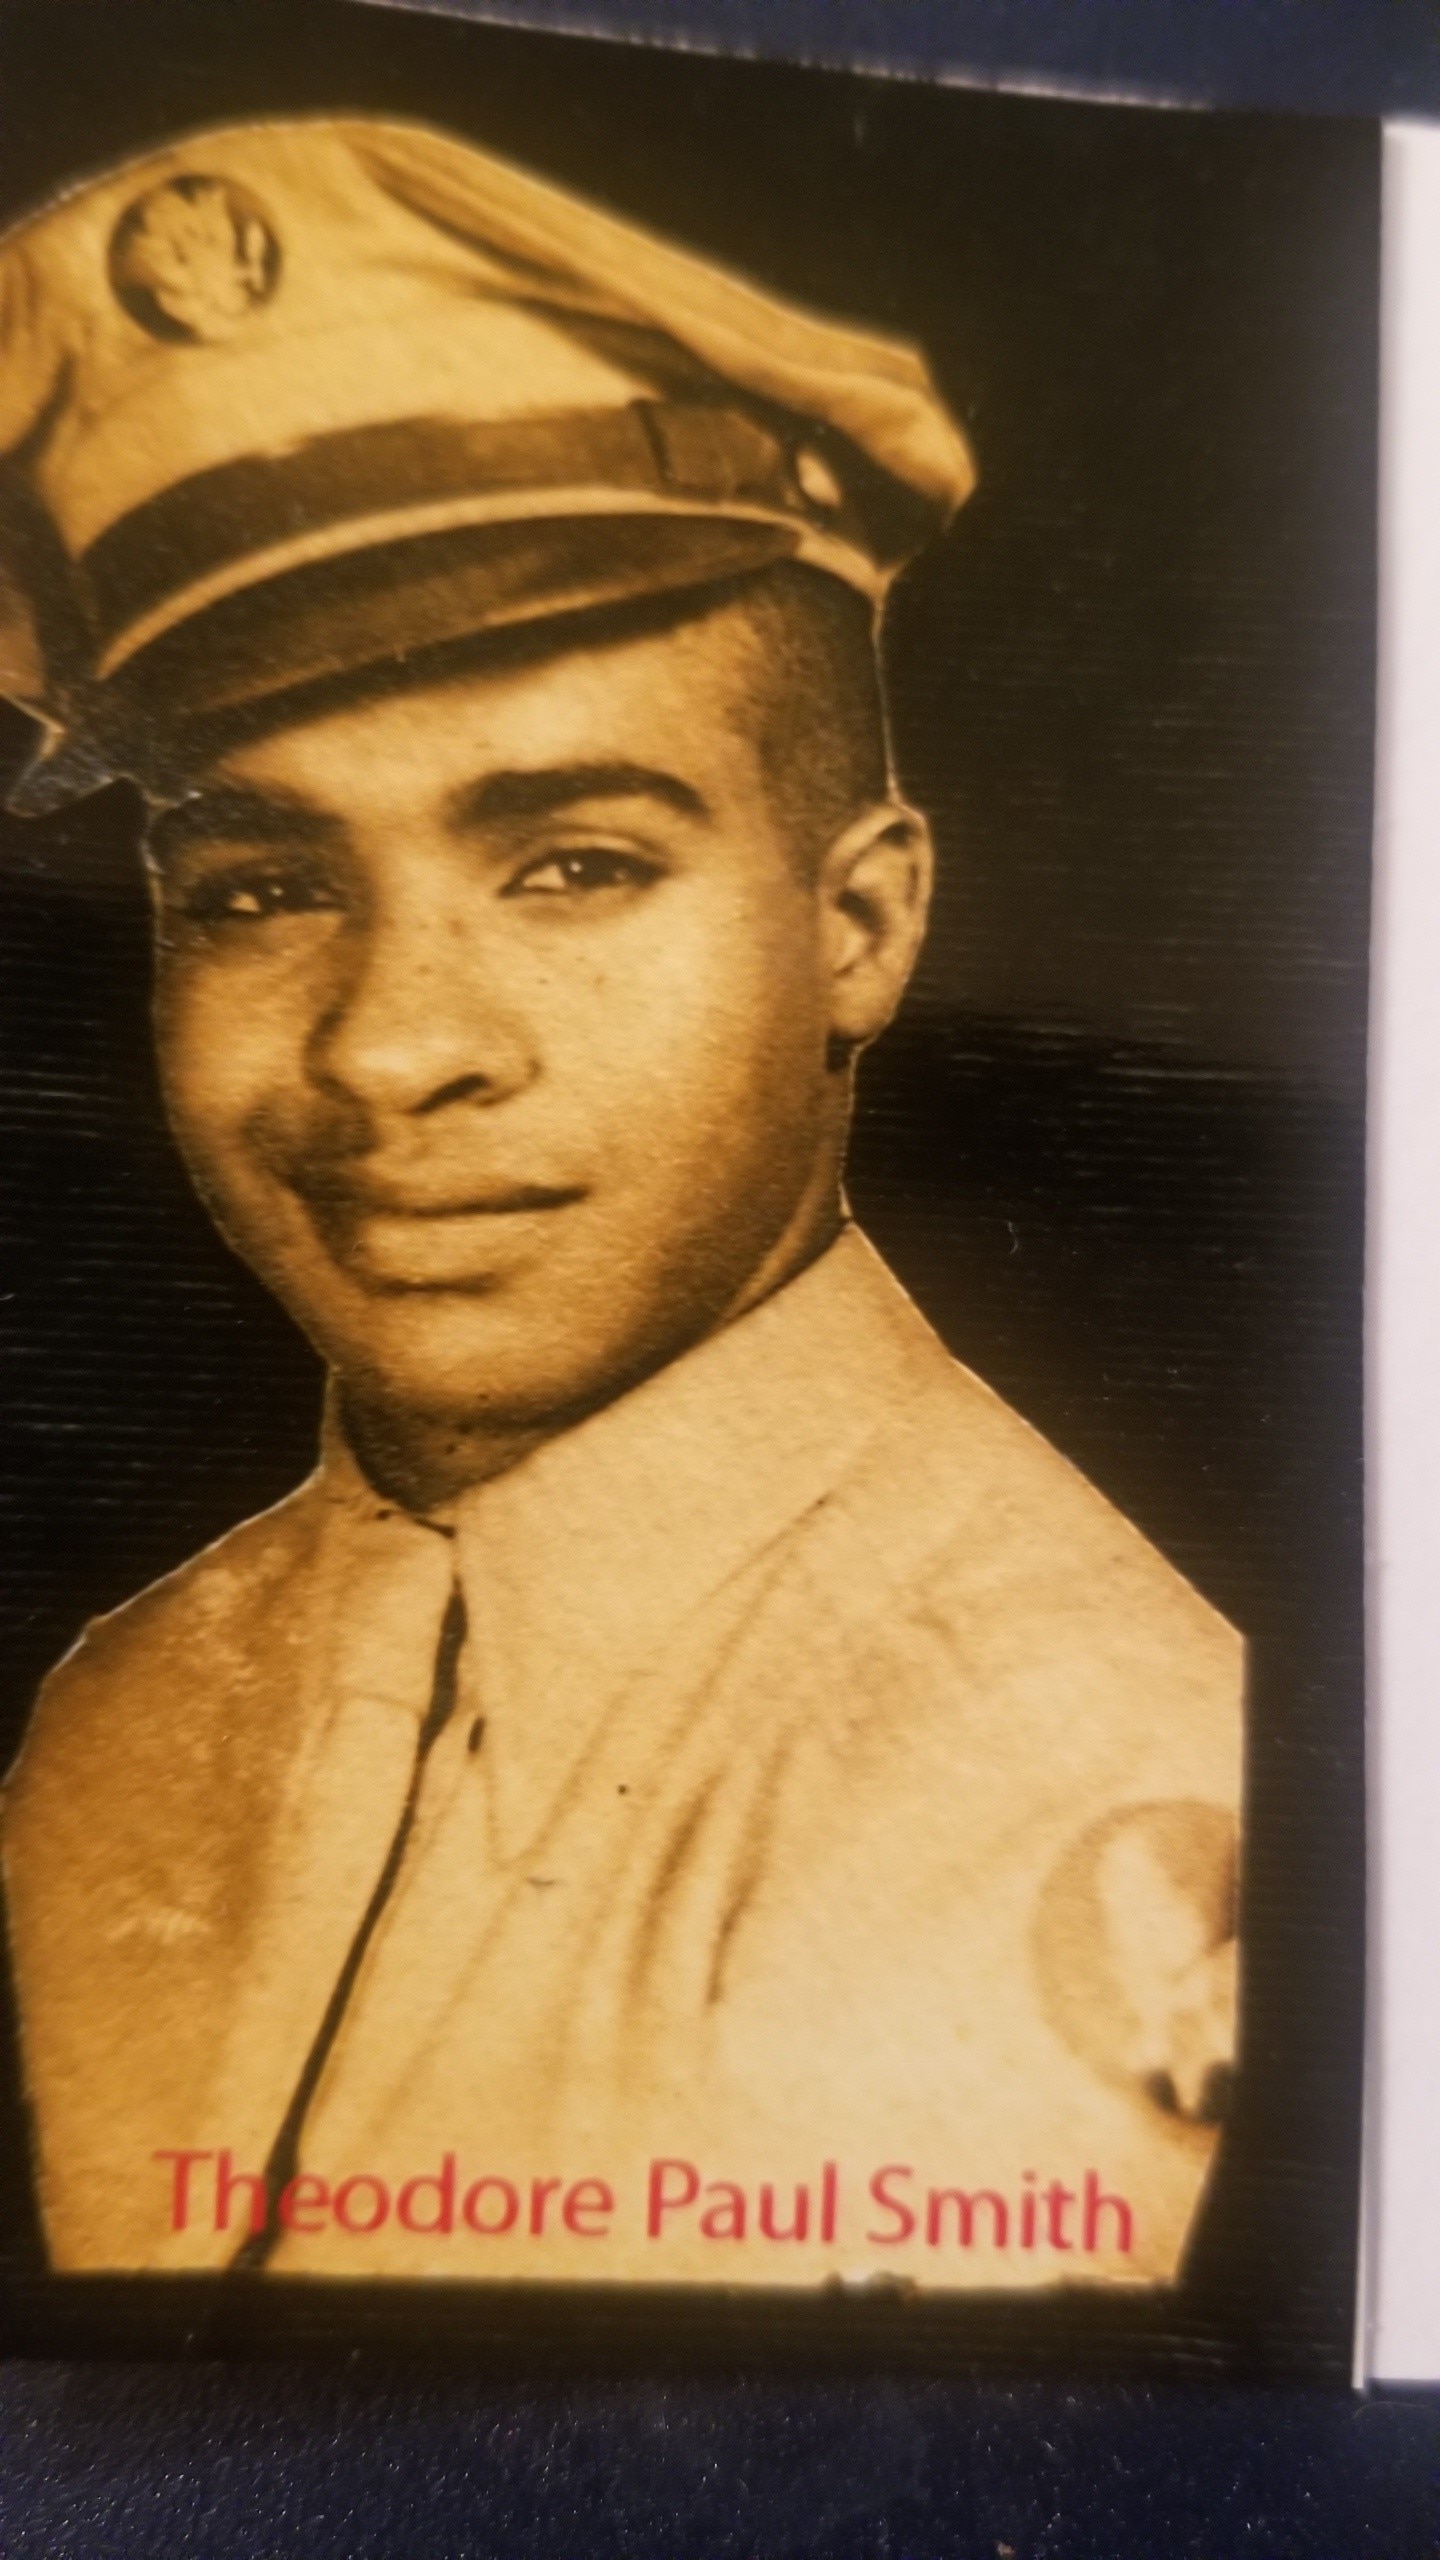 Pictured here: Chris Smith’s father, Theodore Paul Smith, in uniform as a Tuskegee Airman.